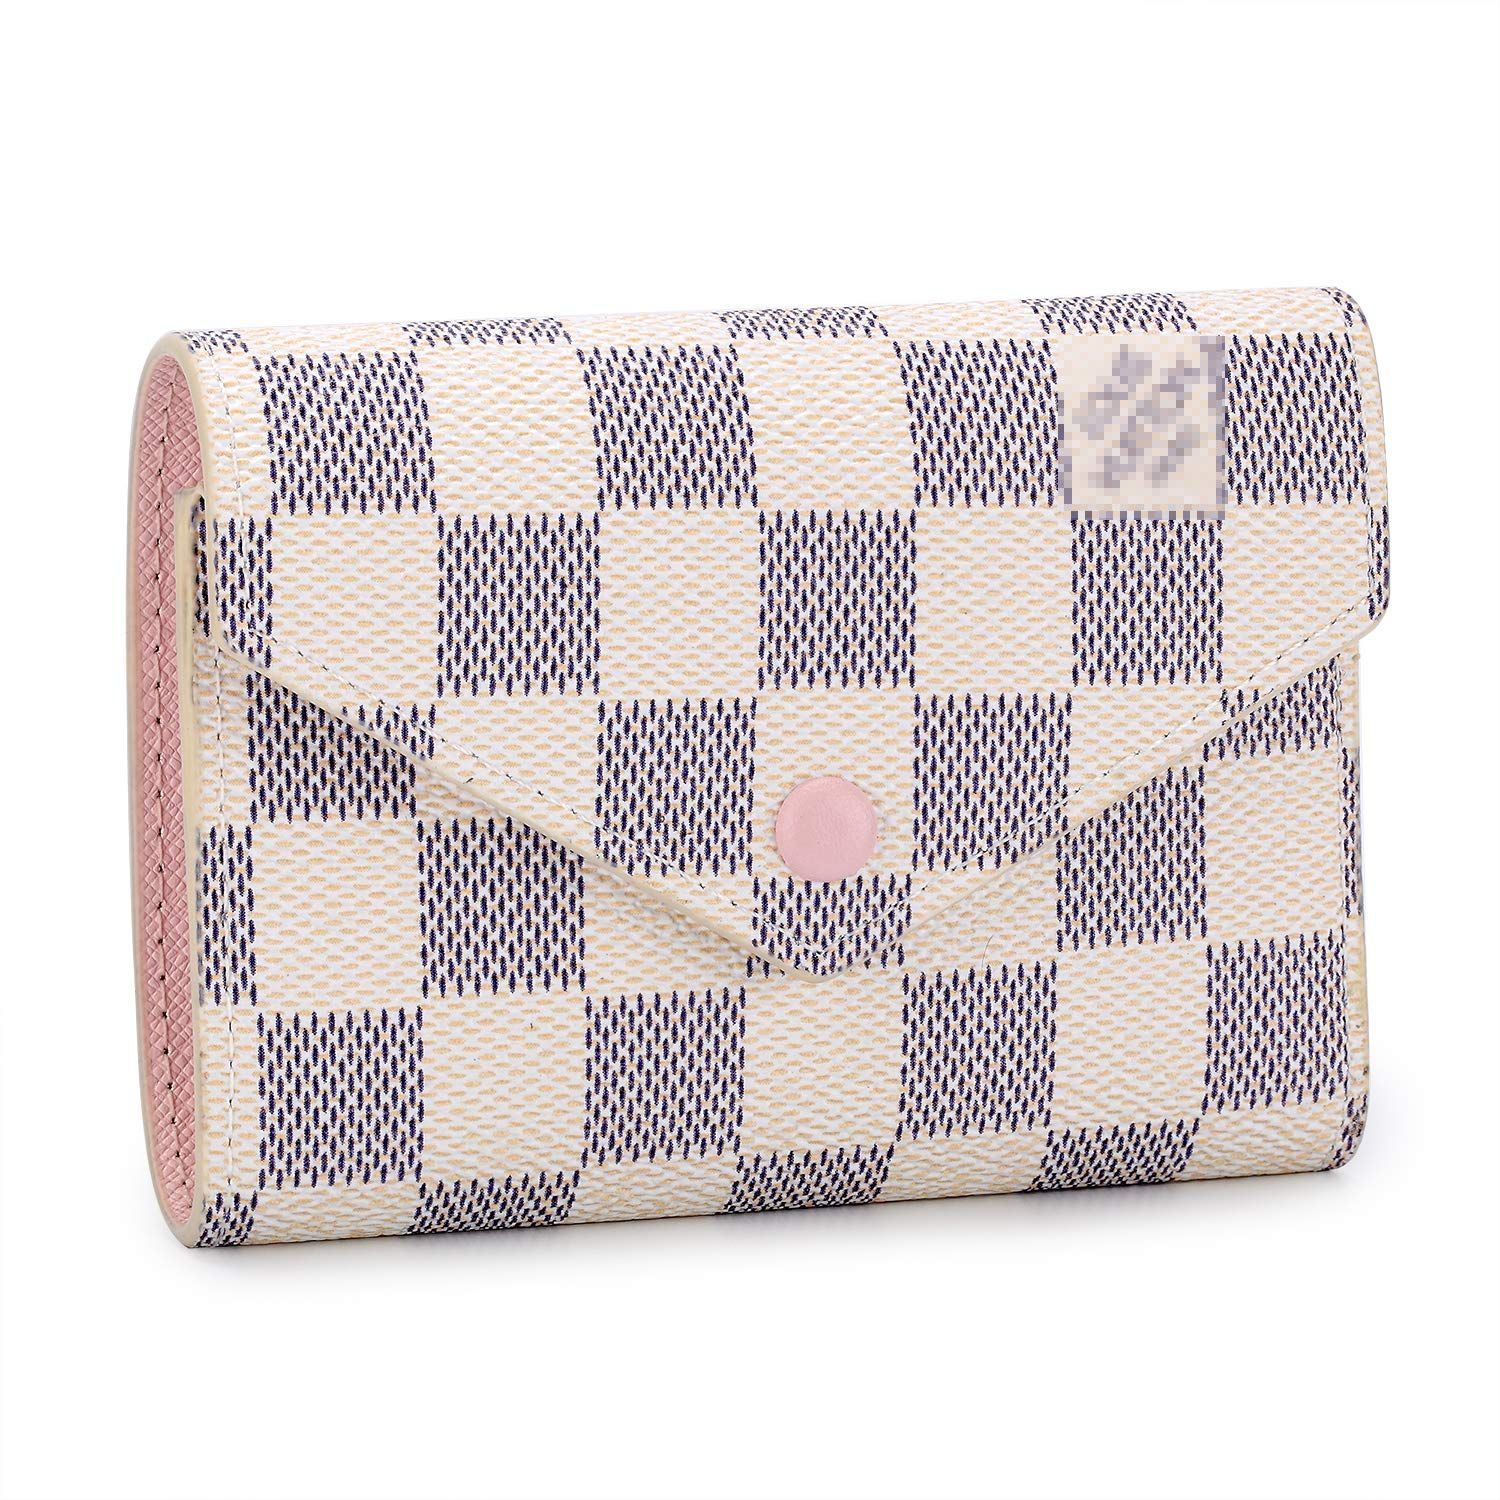 DMYTROVITCHUK Zippy Style Monogram Canvas Wallet With Beige Lining for Woman and Man | Amazon (US)